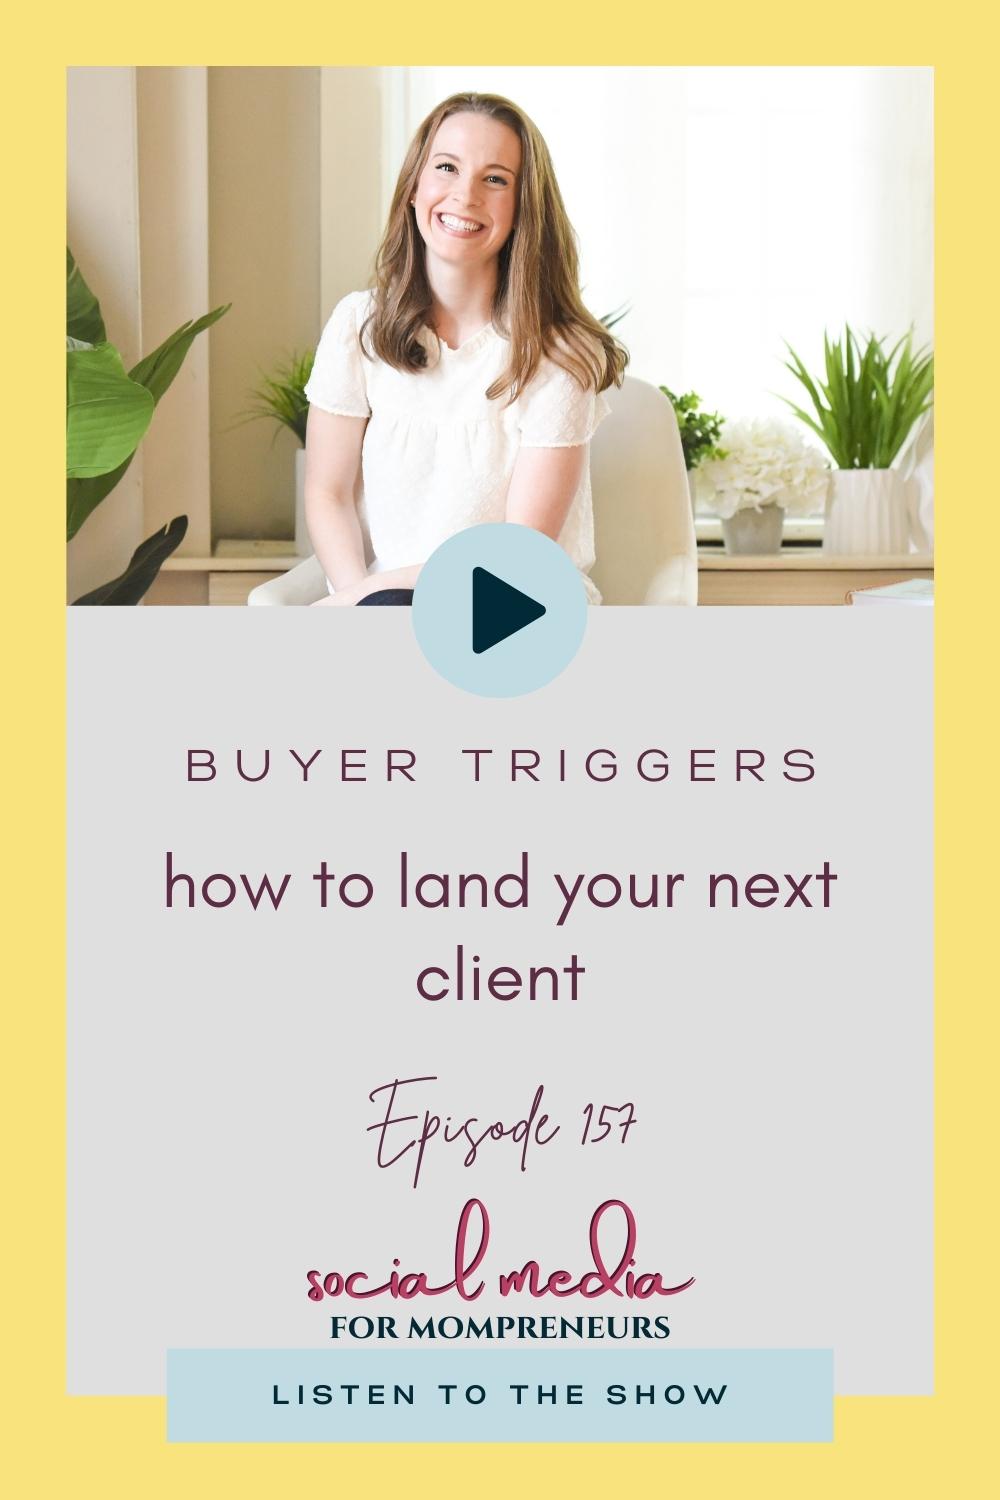 on the left, Elena Ciccotelli, a white female with long blonde hair, is sitting on a white, upholstered chair. Under this are the words buyer trigers, how to land your next client